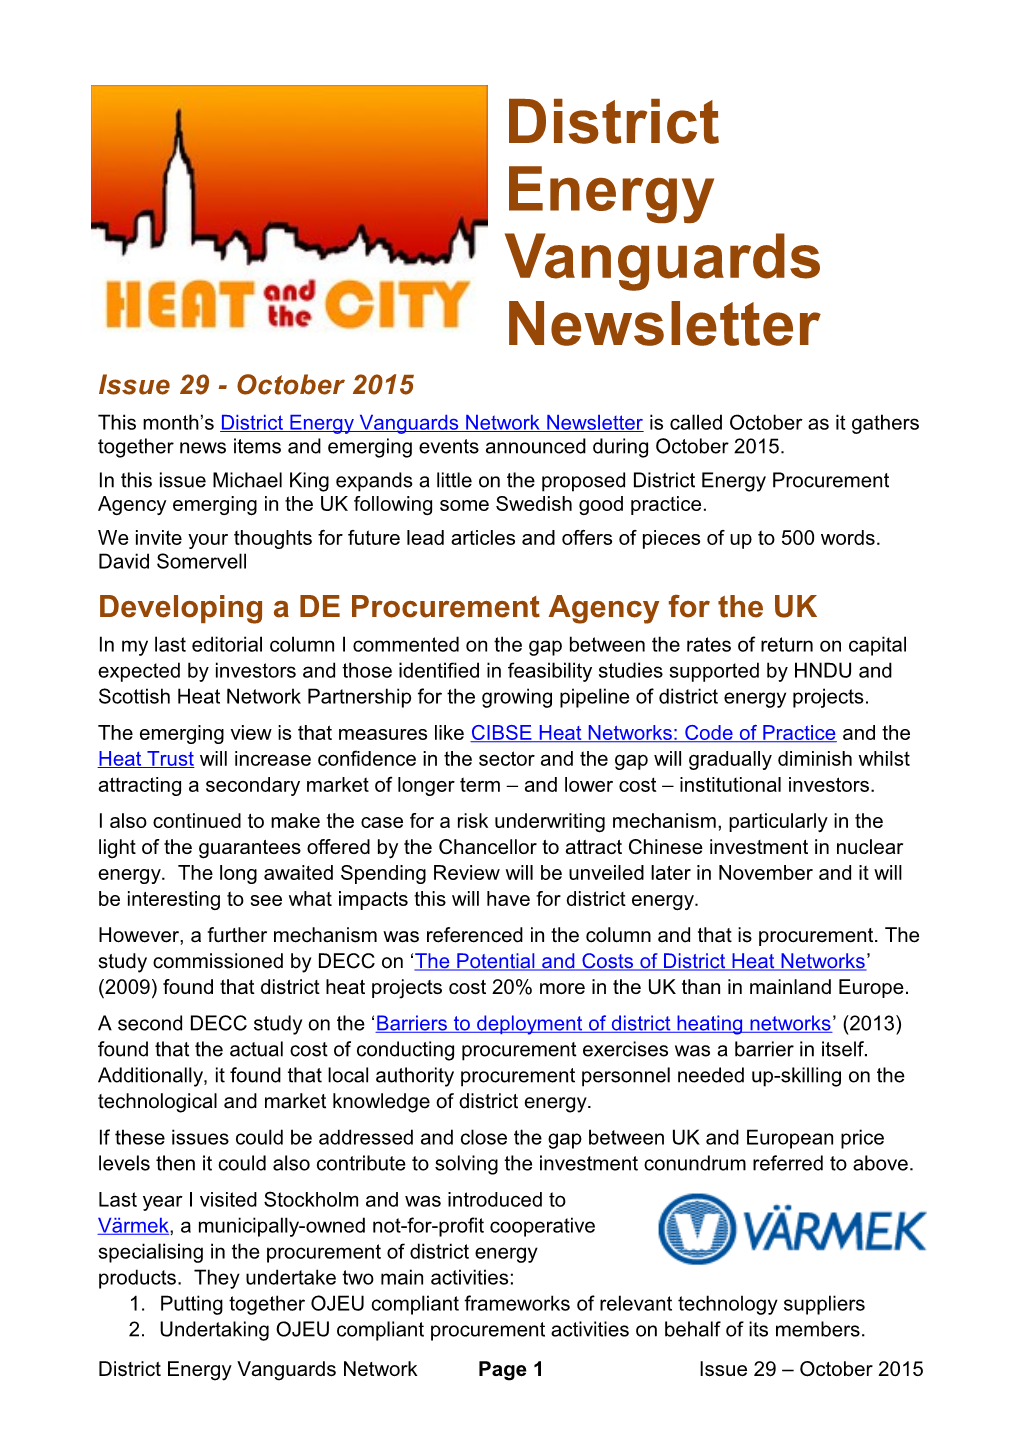 Developing a DE Procurement Agency for the UK